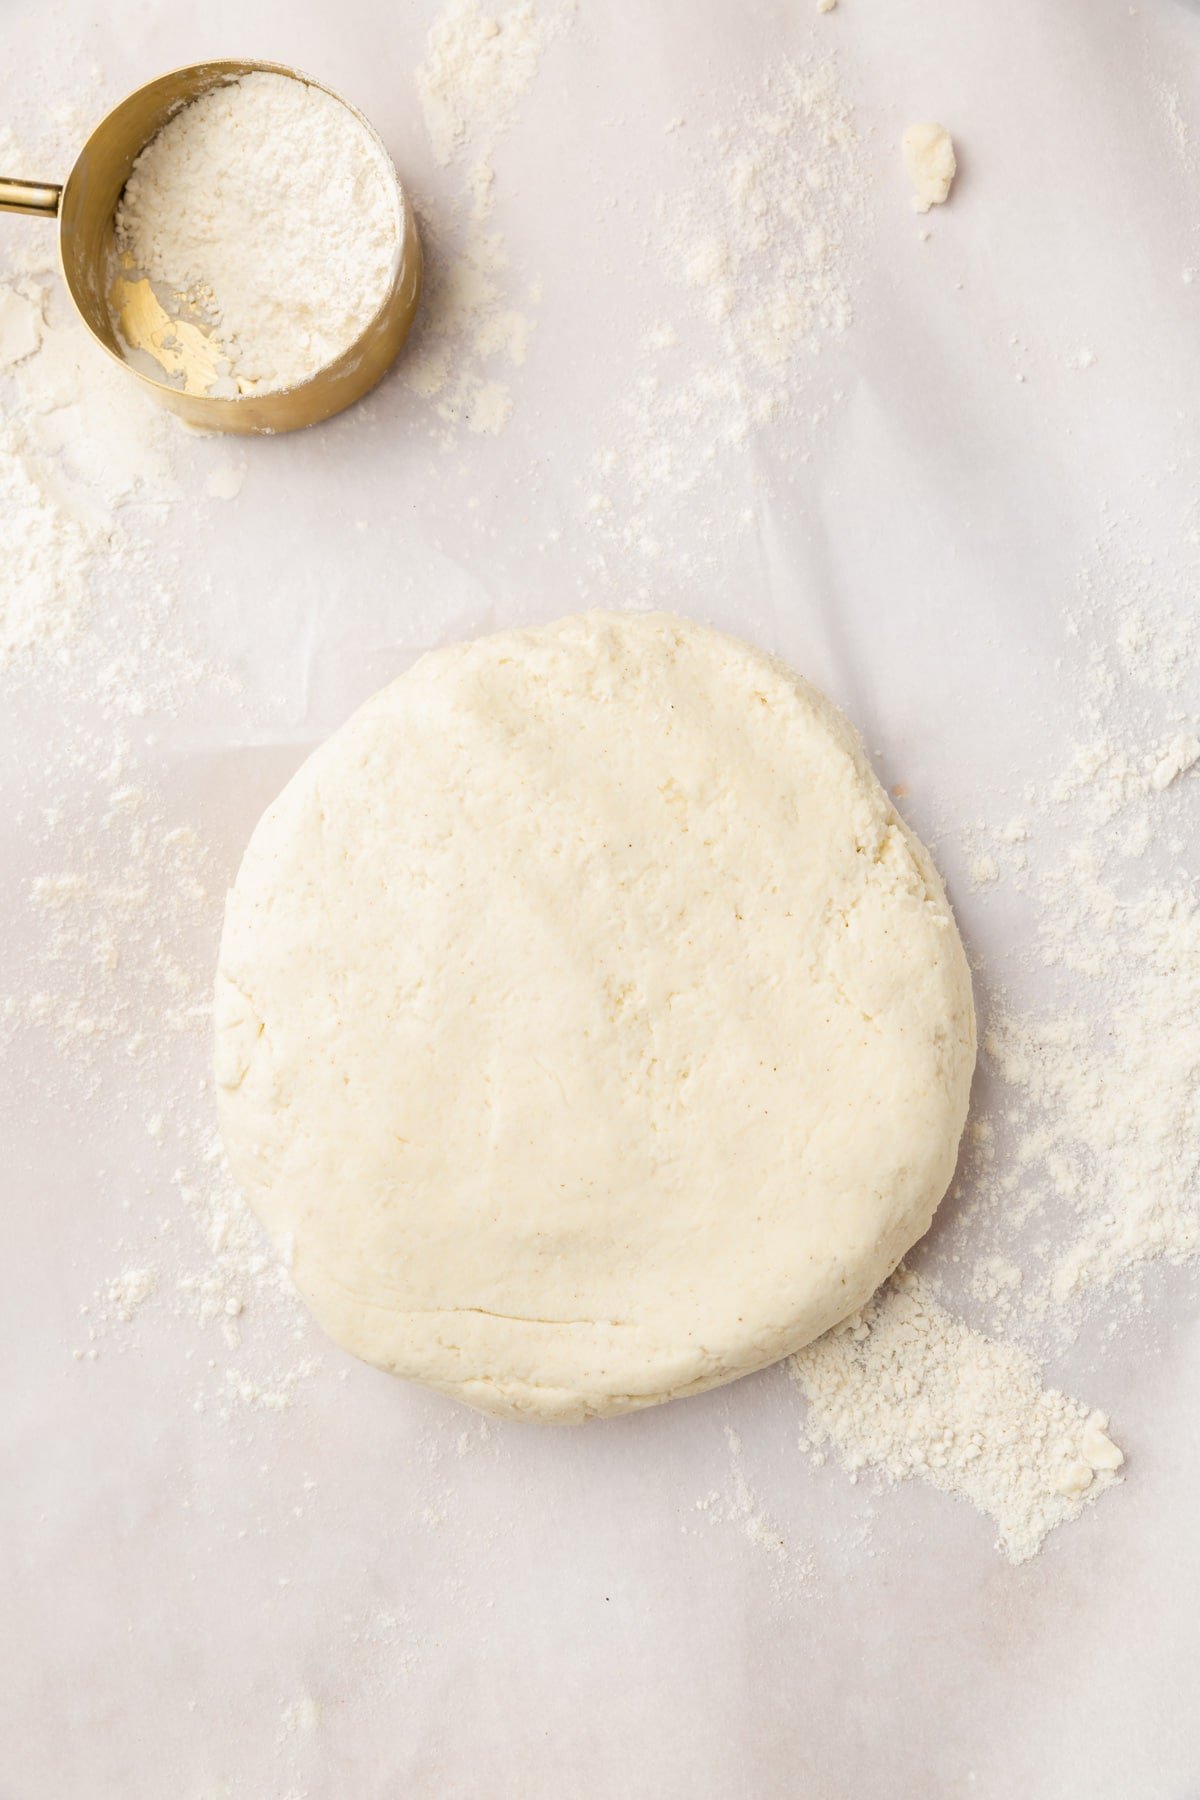 A disk of gluten-free dough on a piece of parchment paper dusted with gluten-free flour.